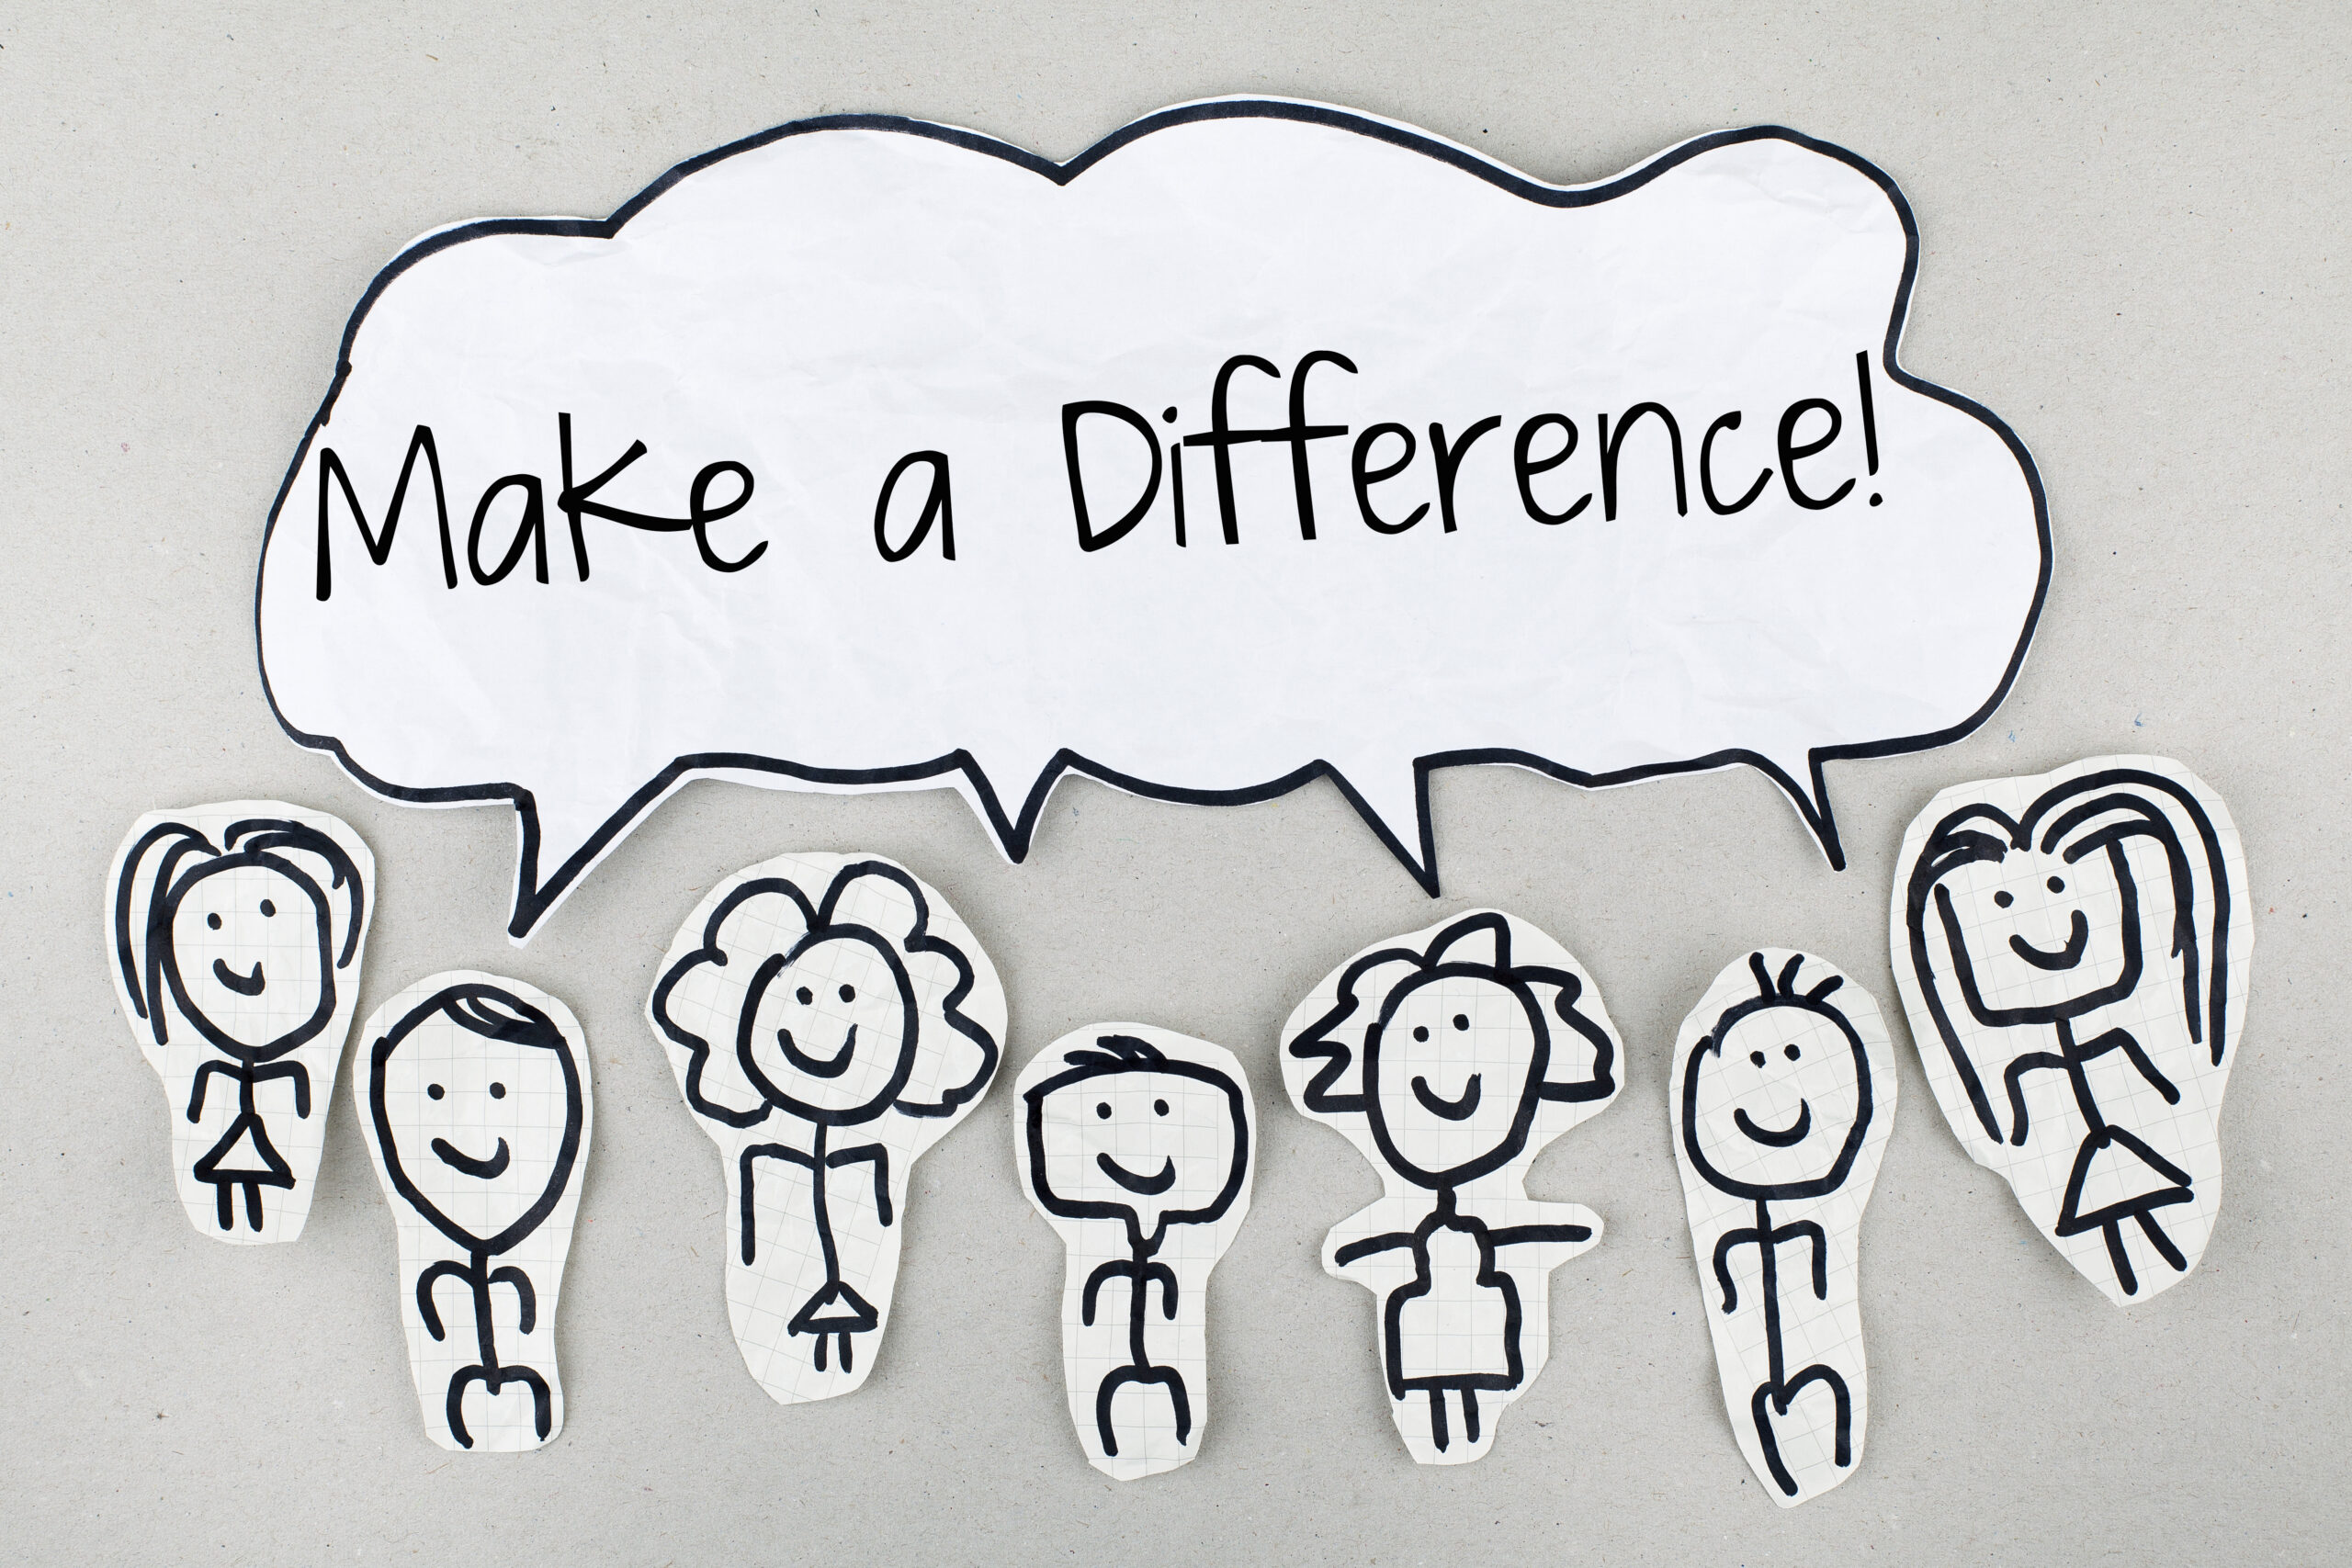 Smiling stick figure volunteers recruited to help and exclaiming "Make a Difference!"